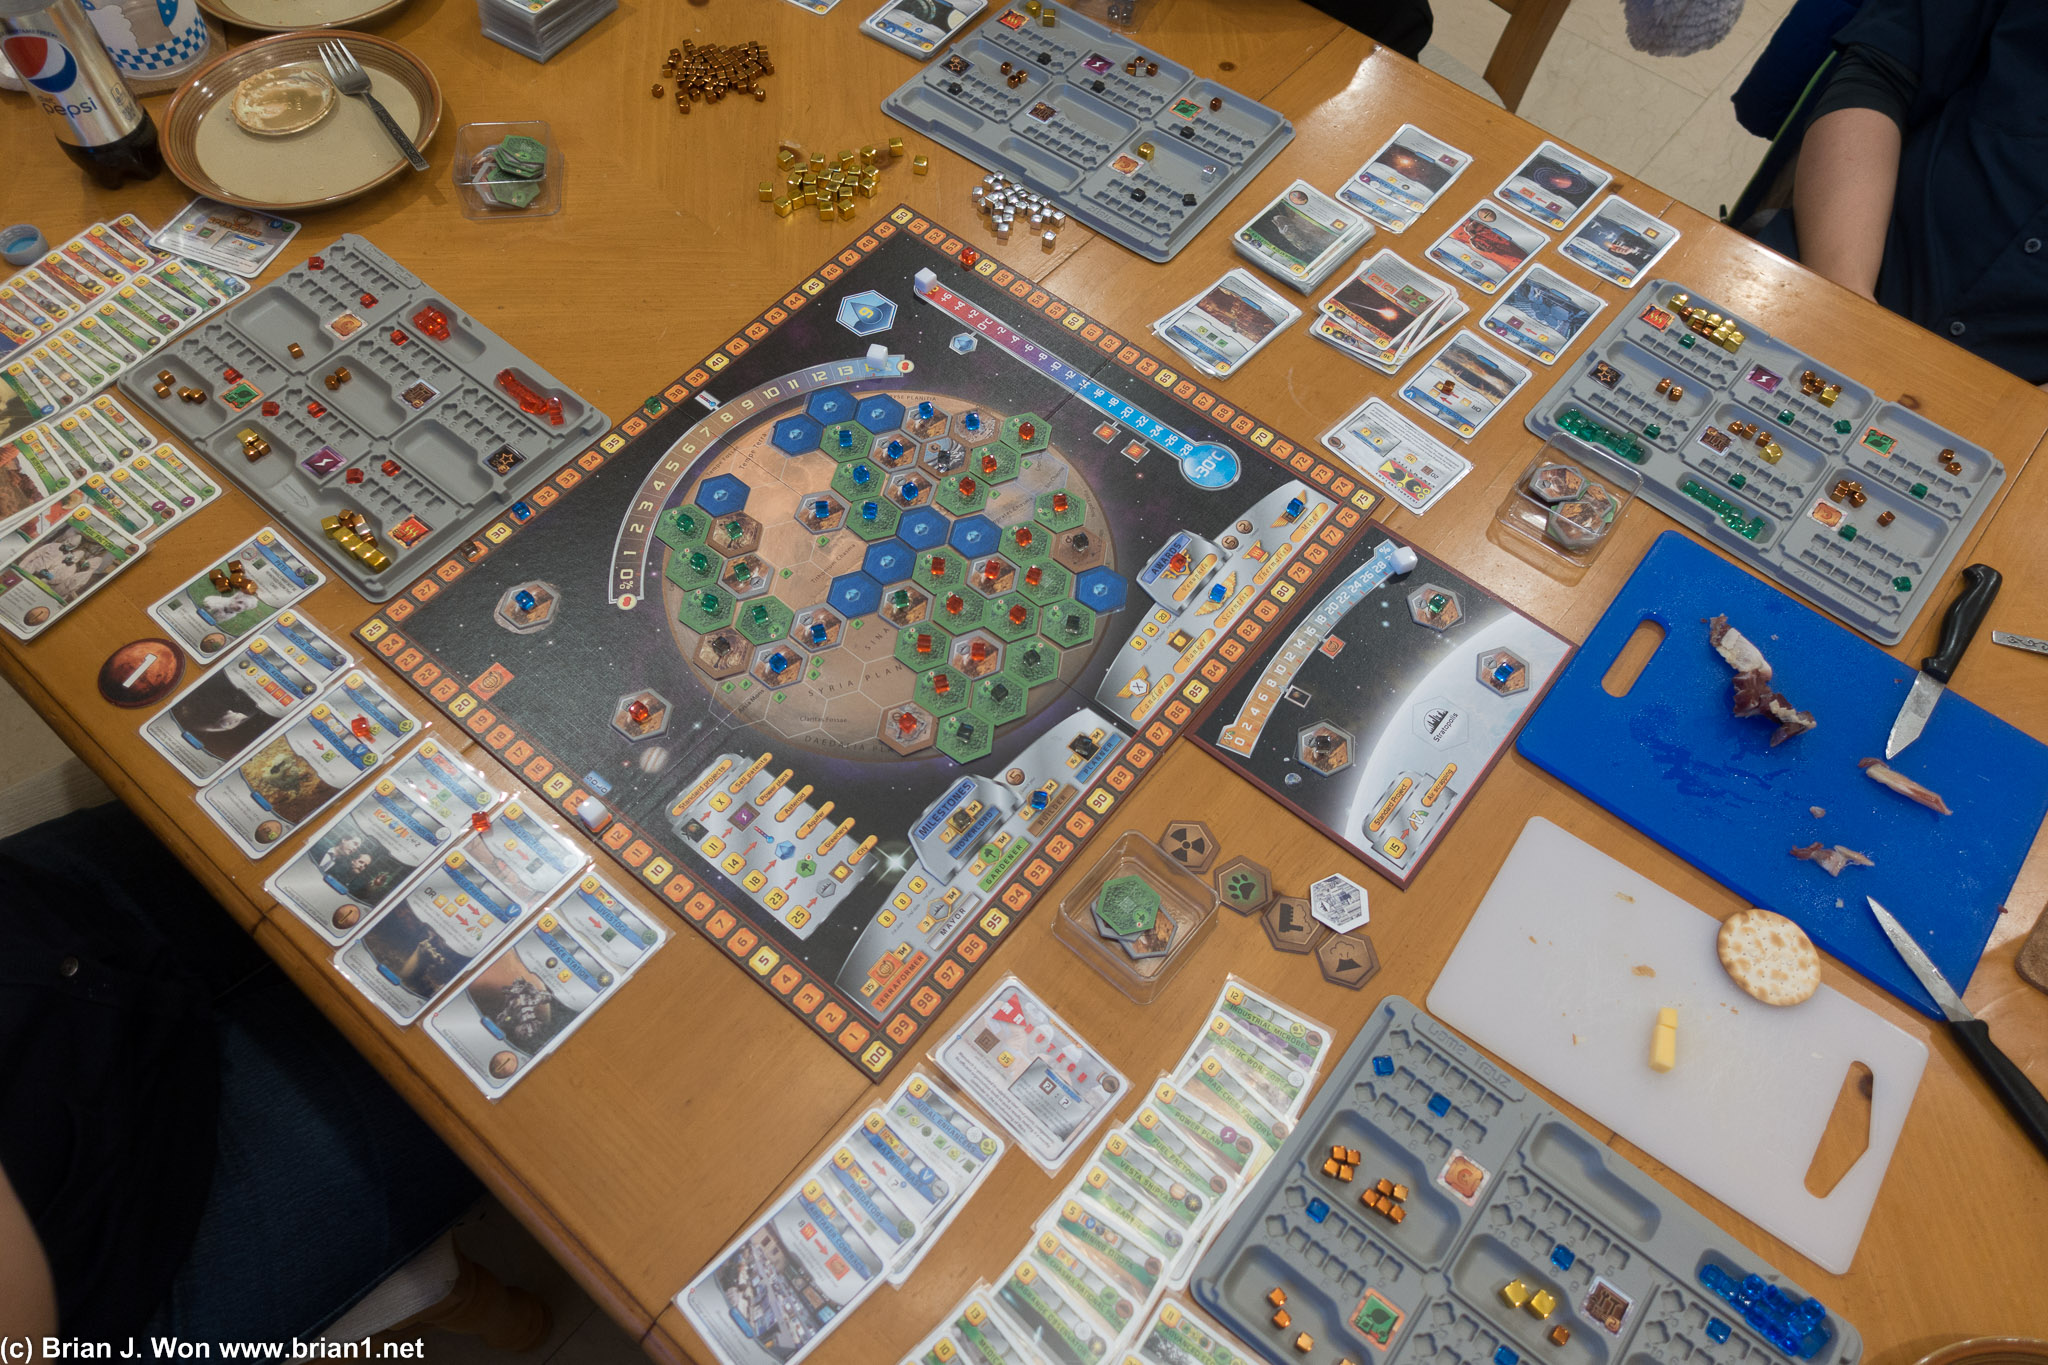 Forgot to take a picture of Splendor. This is Terraforming Mars with the Venus expansion.